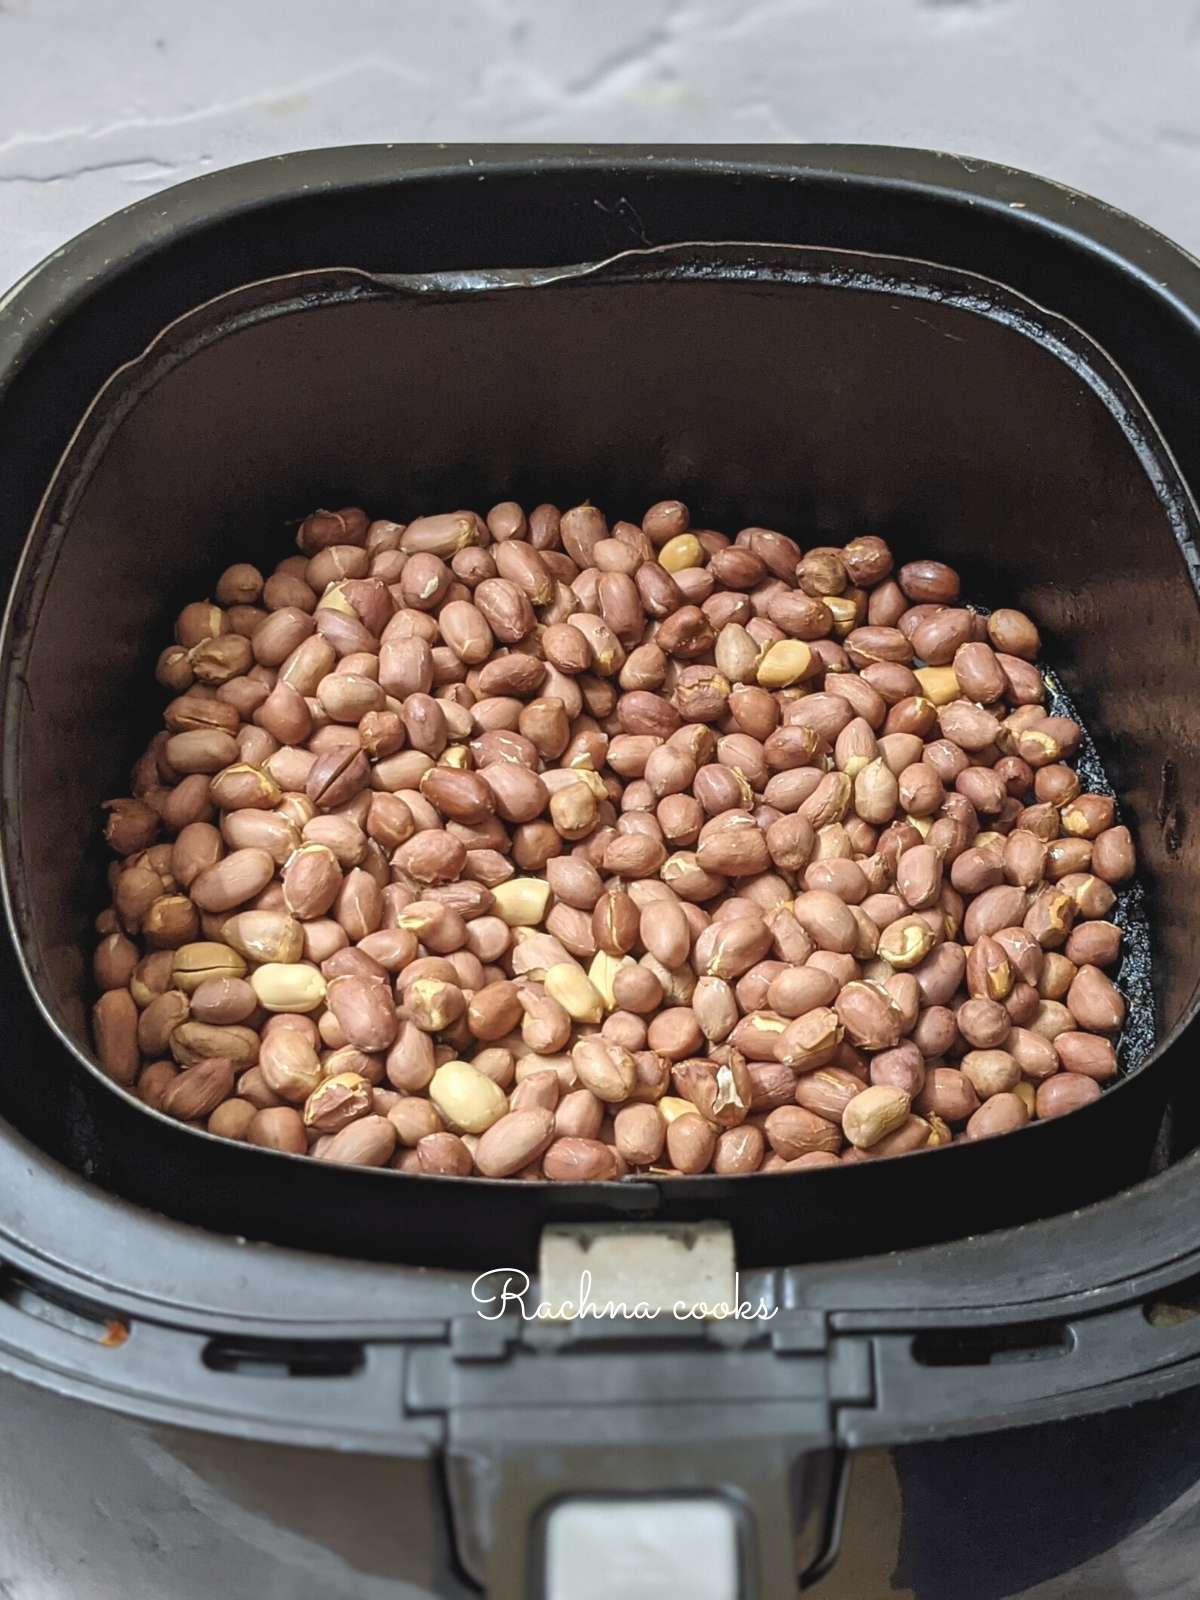 Peanuts in air fryer baskets for air frying.